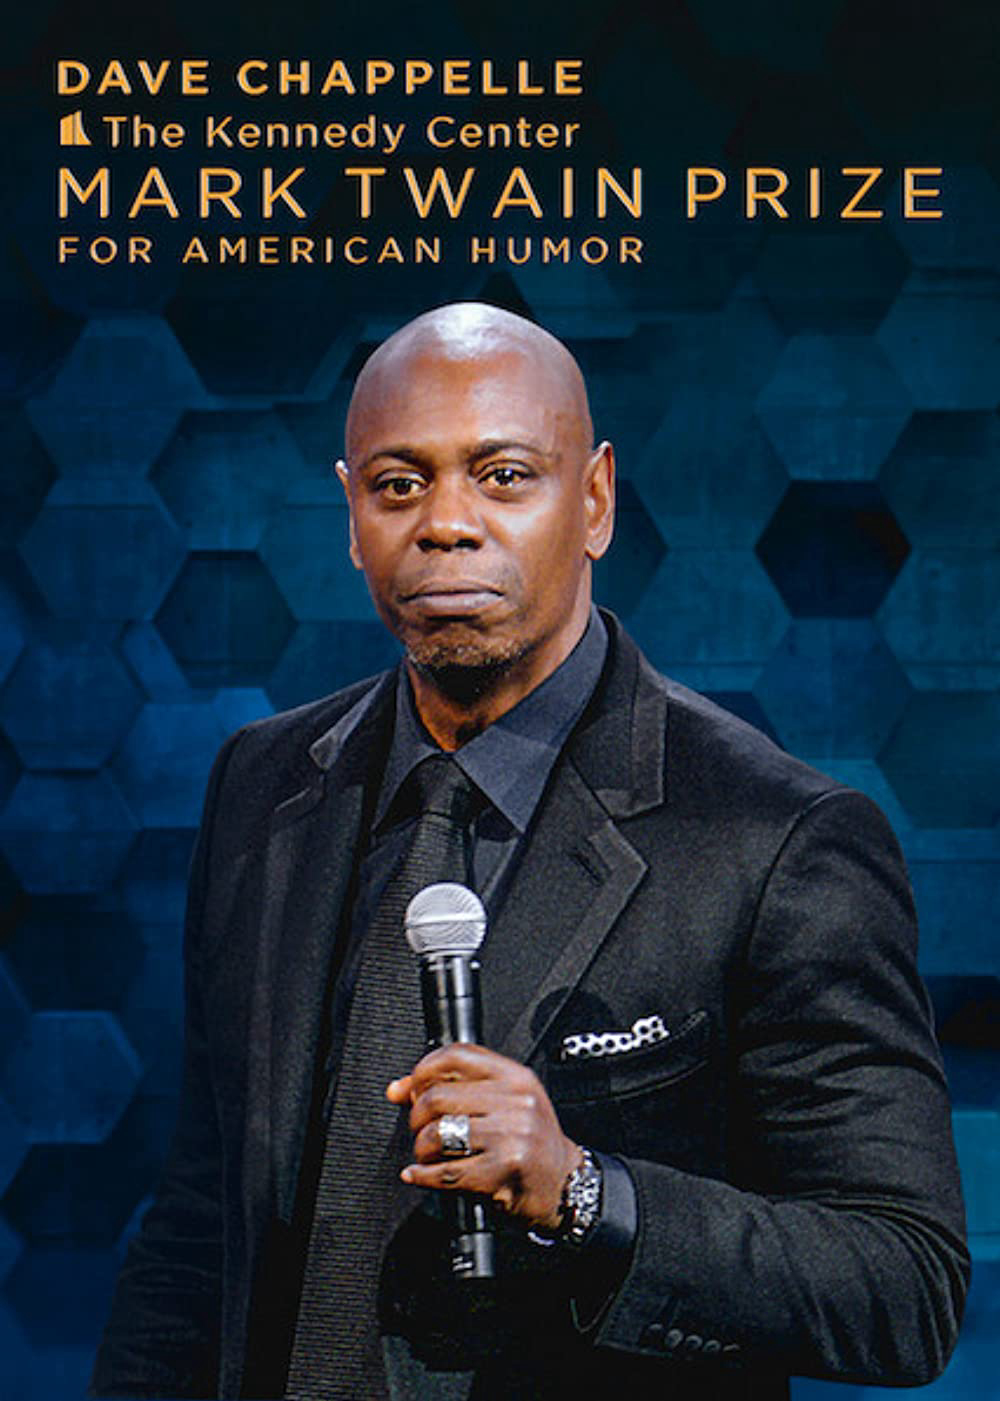 Poster Phim Dave Chappelle: Giải thưởng Mark Twain về hài kịch (Dave Chappelle: The Kennedy Center Mark Twain Prize for American Humor)